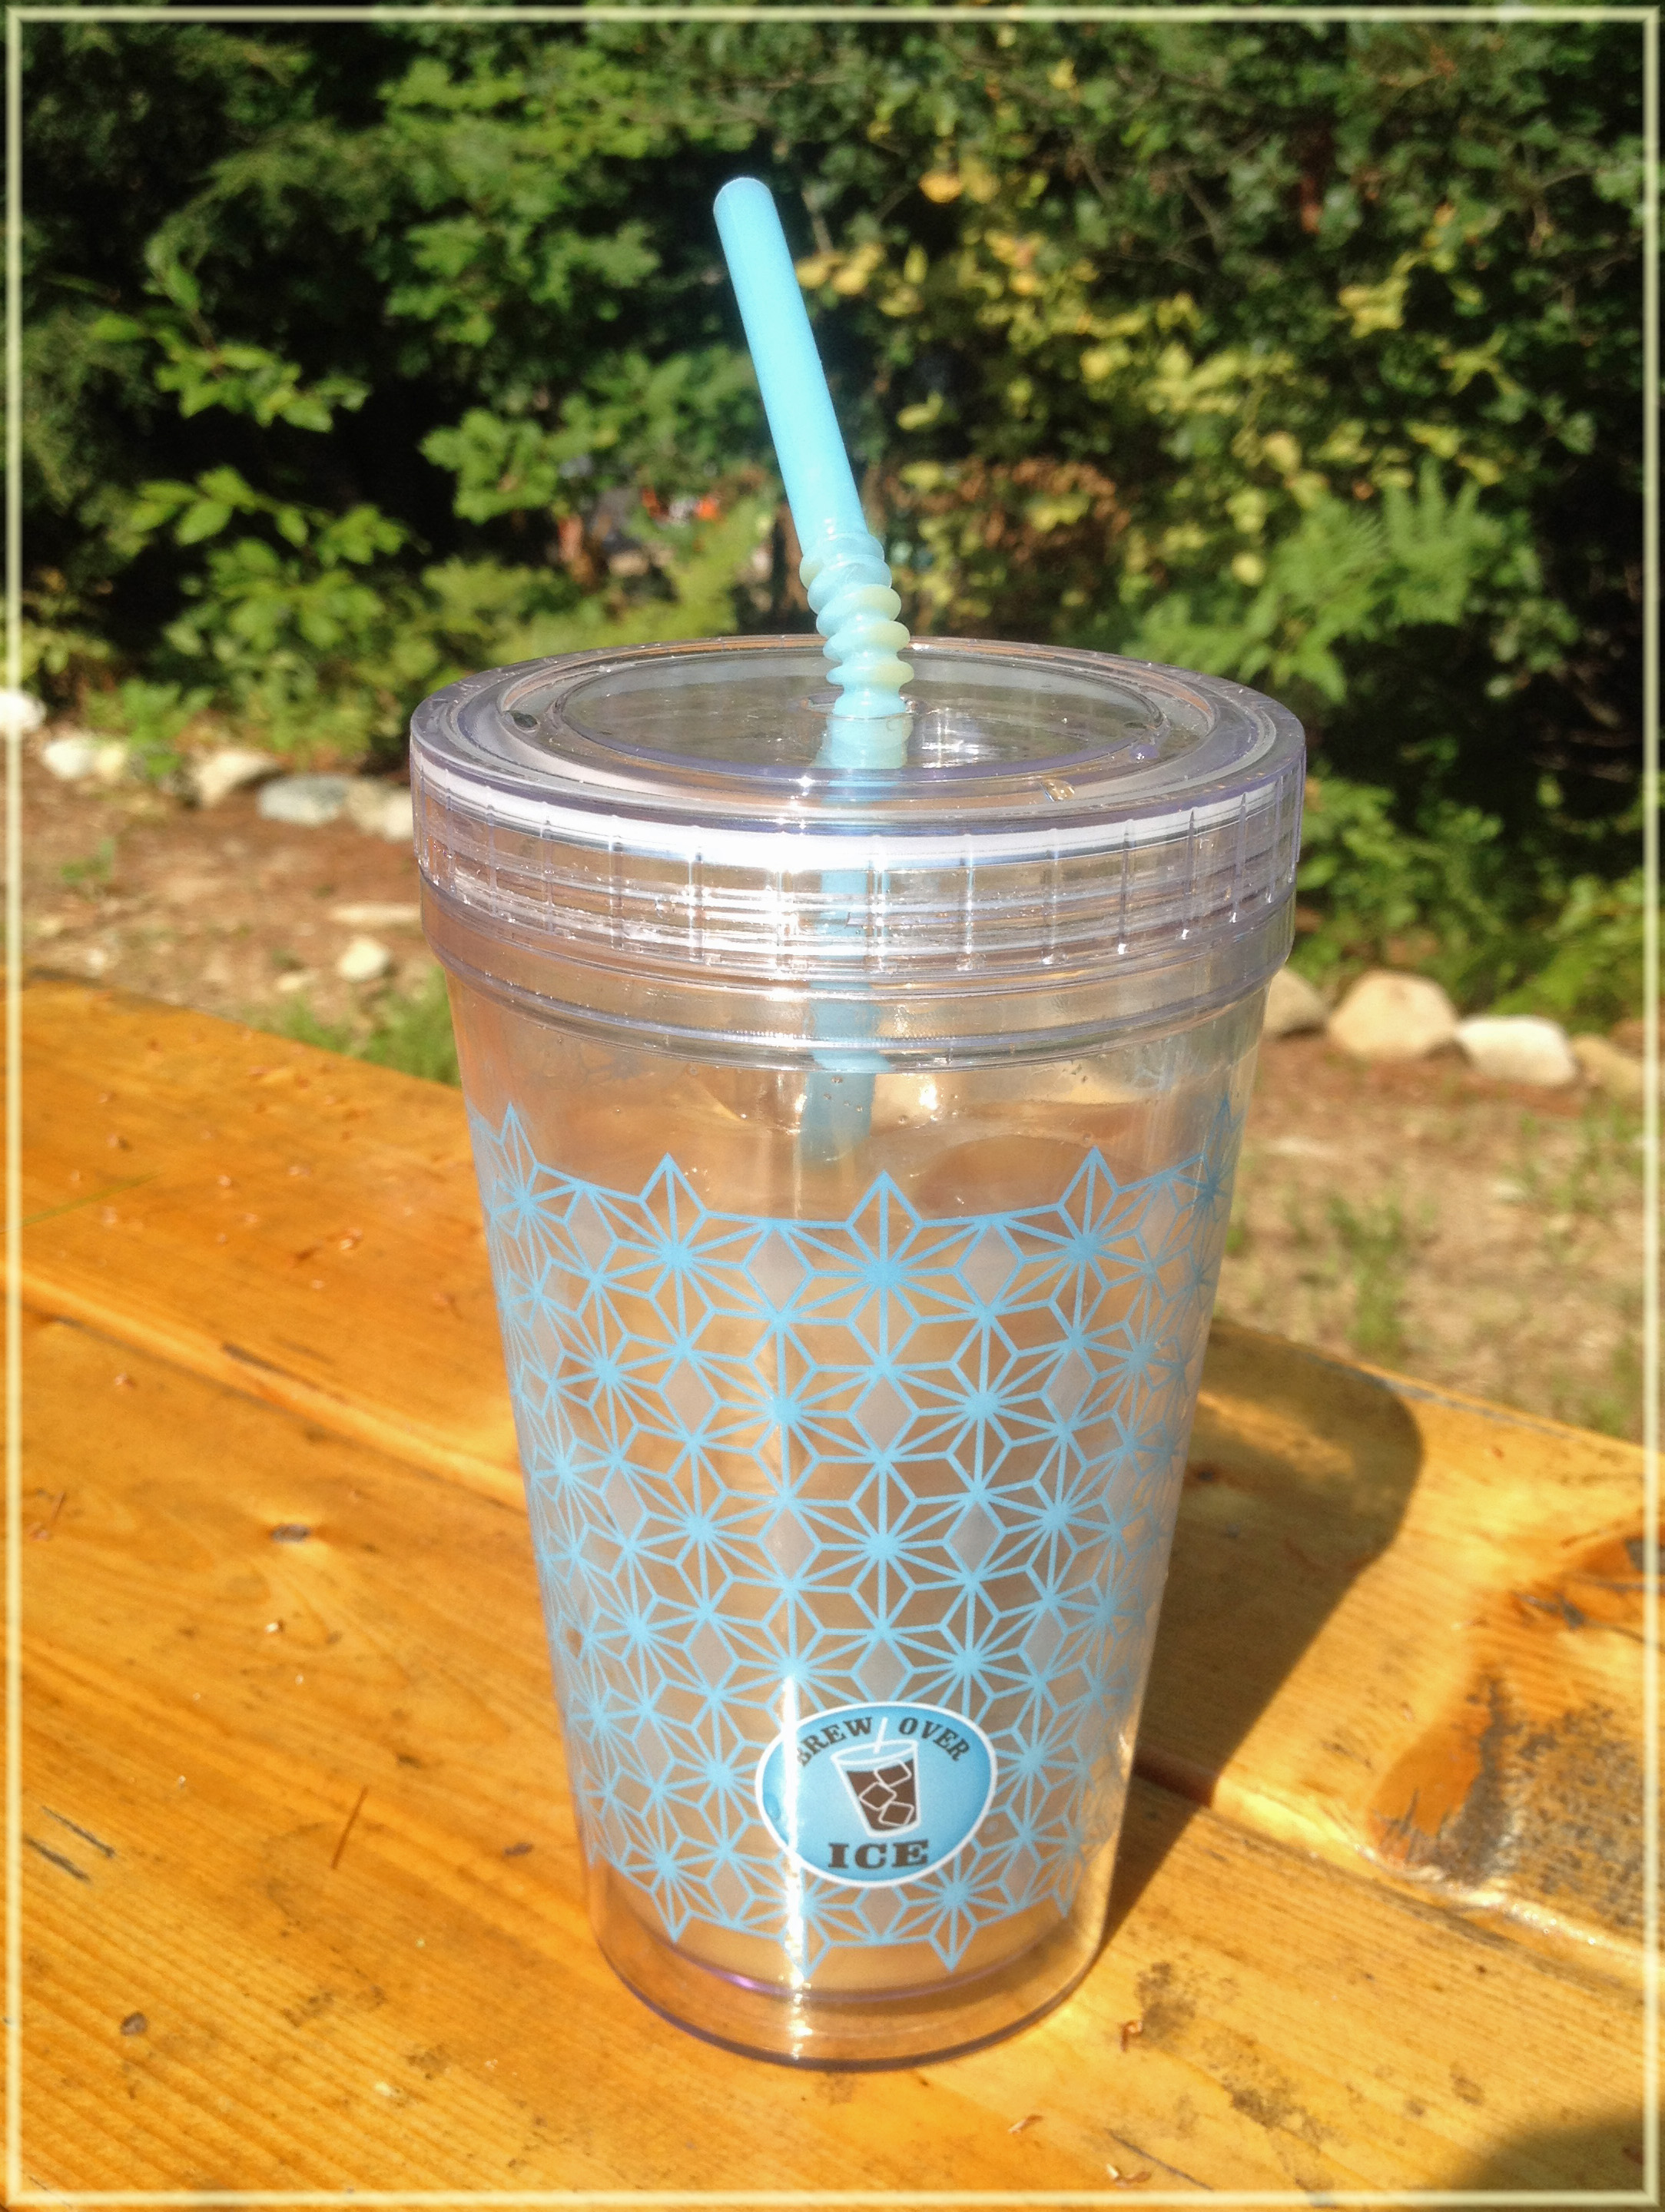 http://www.mommysfabulousfinds.com/wp-content/uploads/2013/09/keurig-iced-coffee.jpg